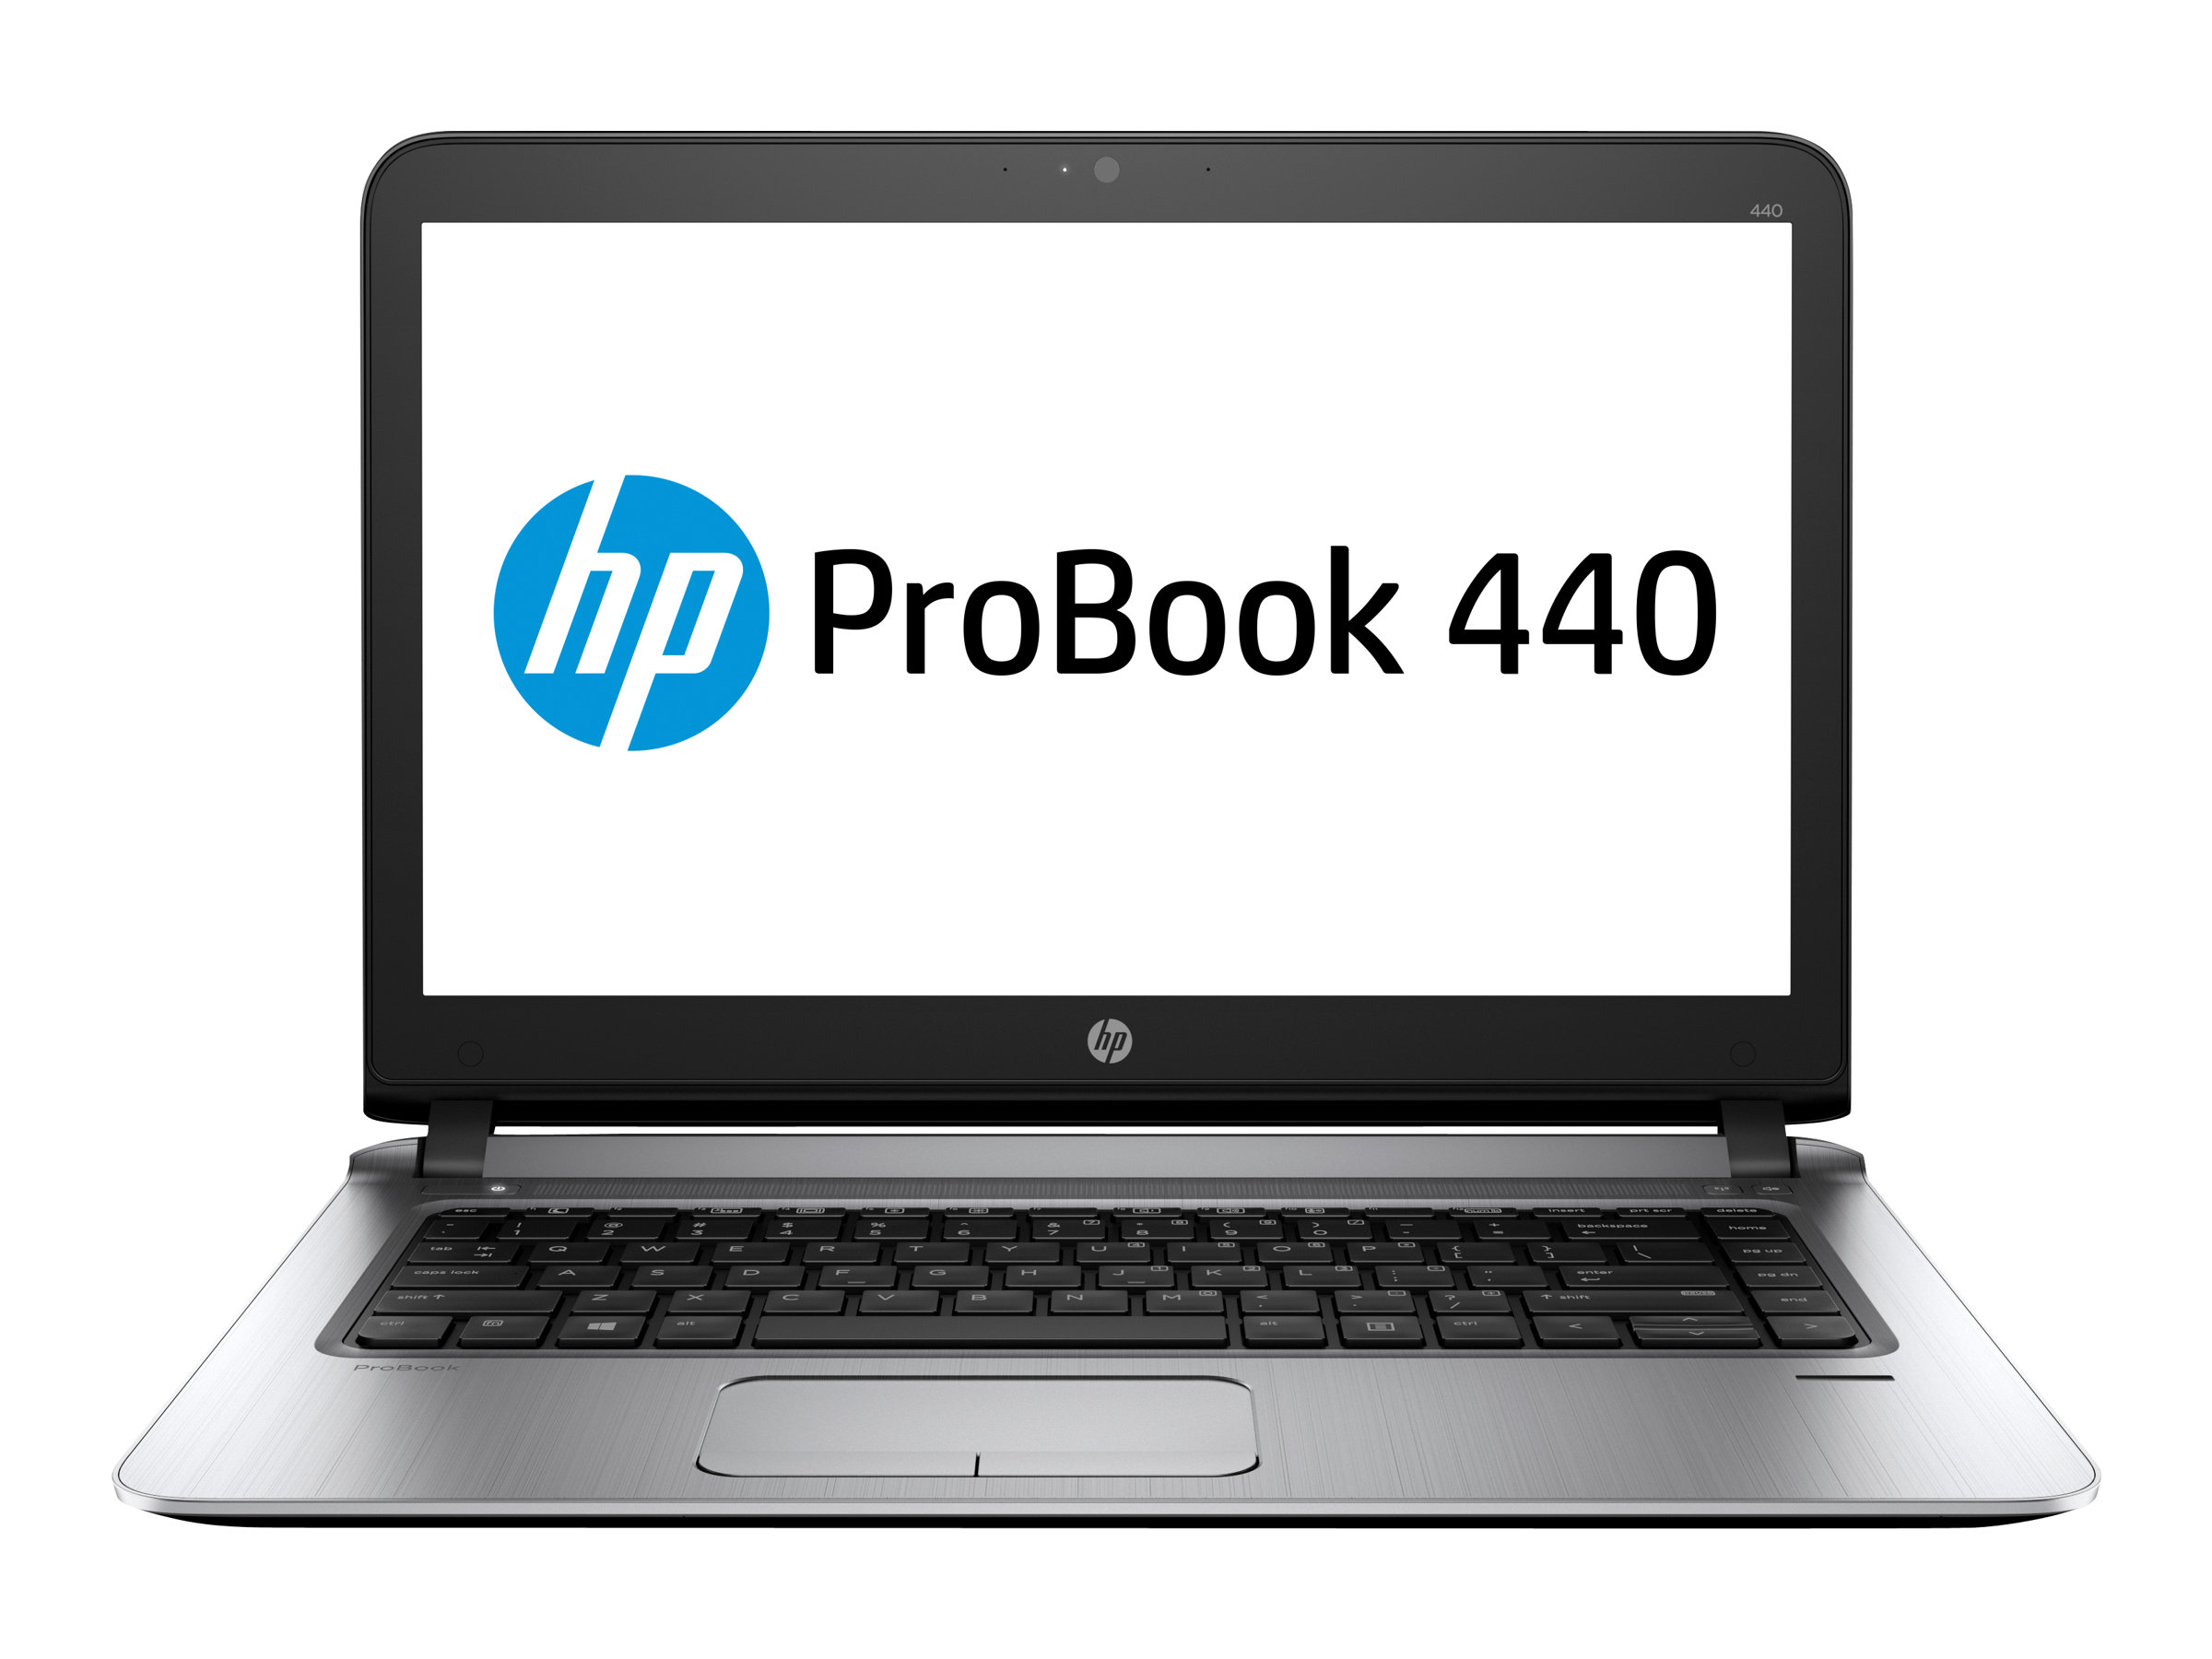 HP ProBook 450 G3 Notebook - full specs, details and review